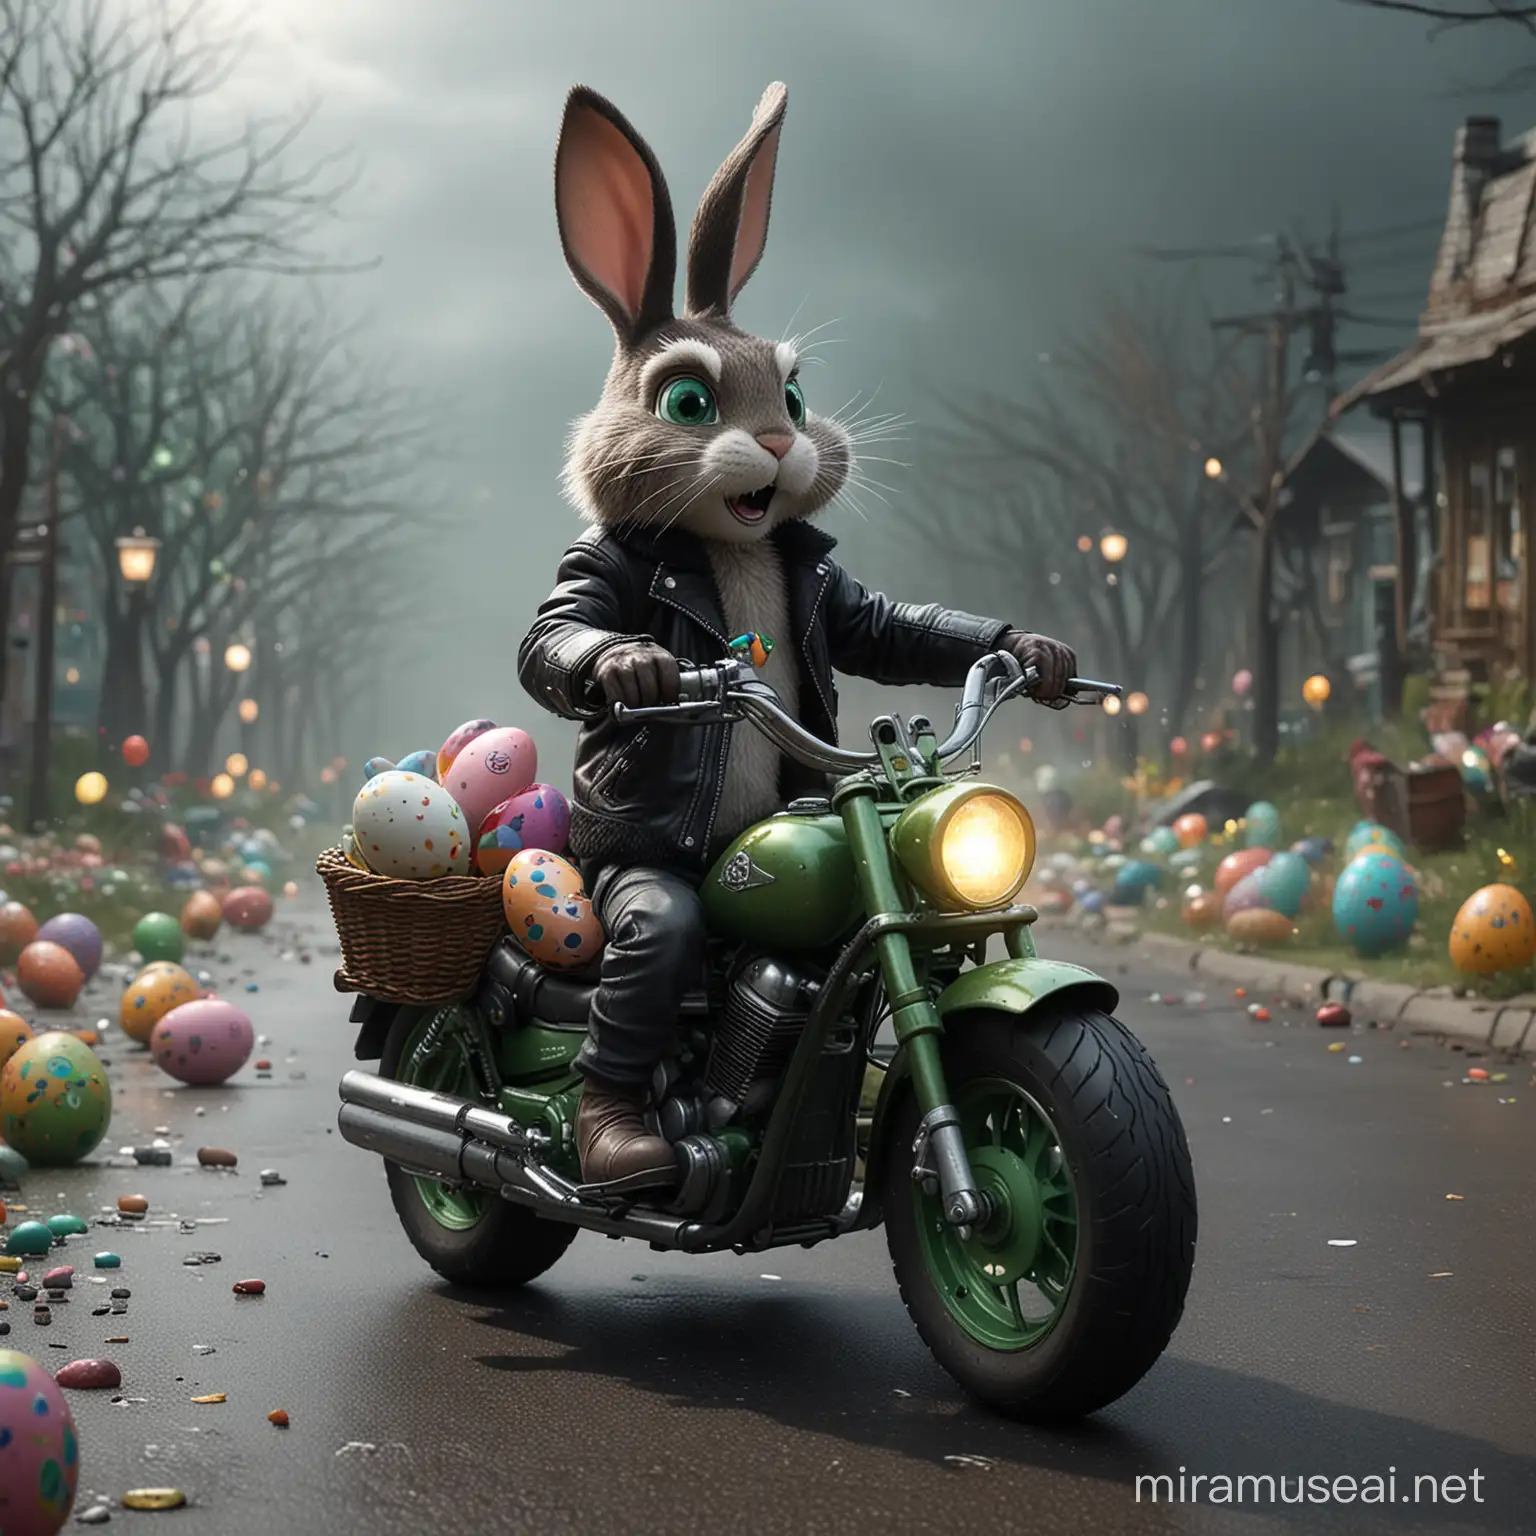 Startling Easter Bunny on Chopper Motorcycle with Falling Easter Eggs